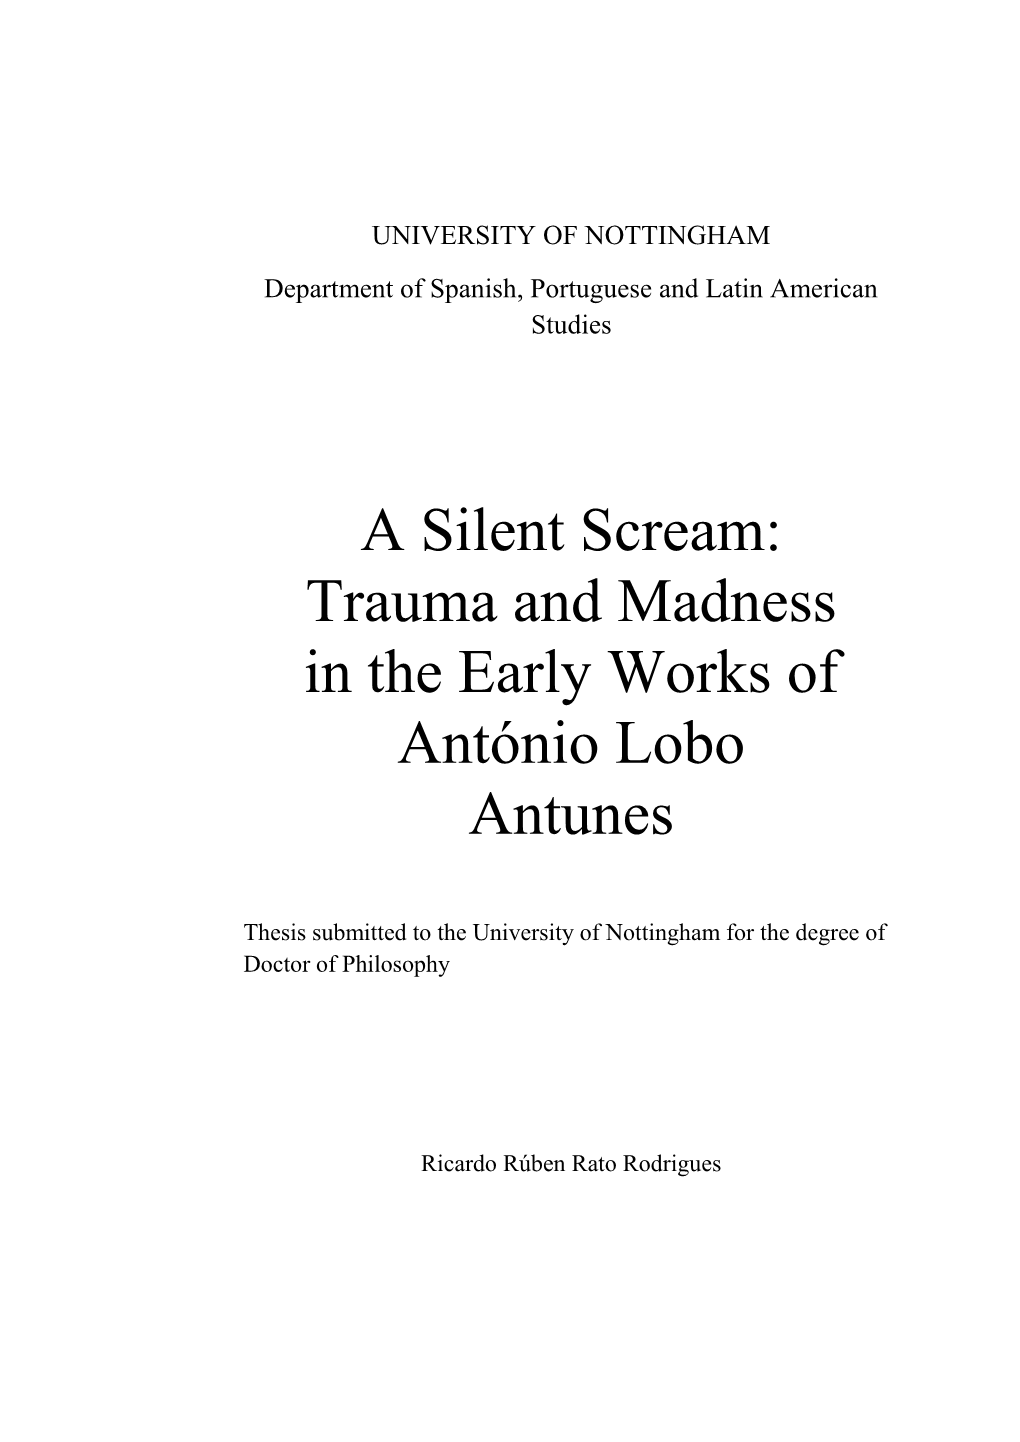 A Silent Scream: Trauma and Madness in the Early Works of António Lobo Antunes